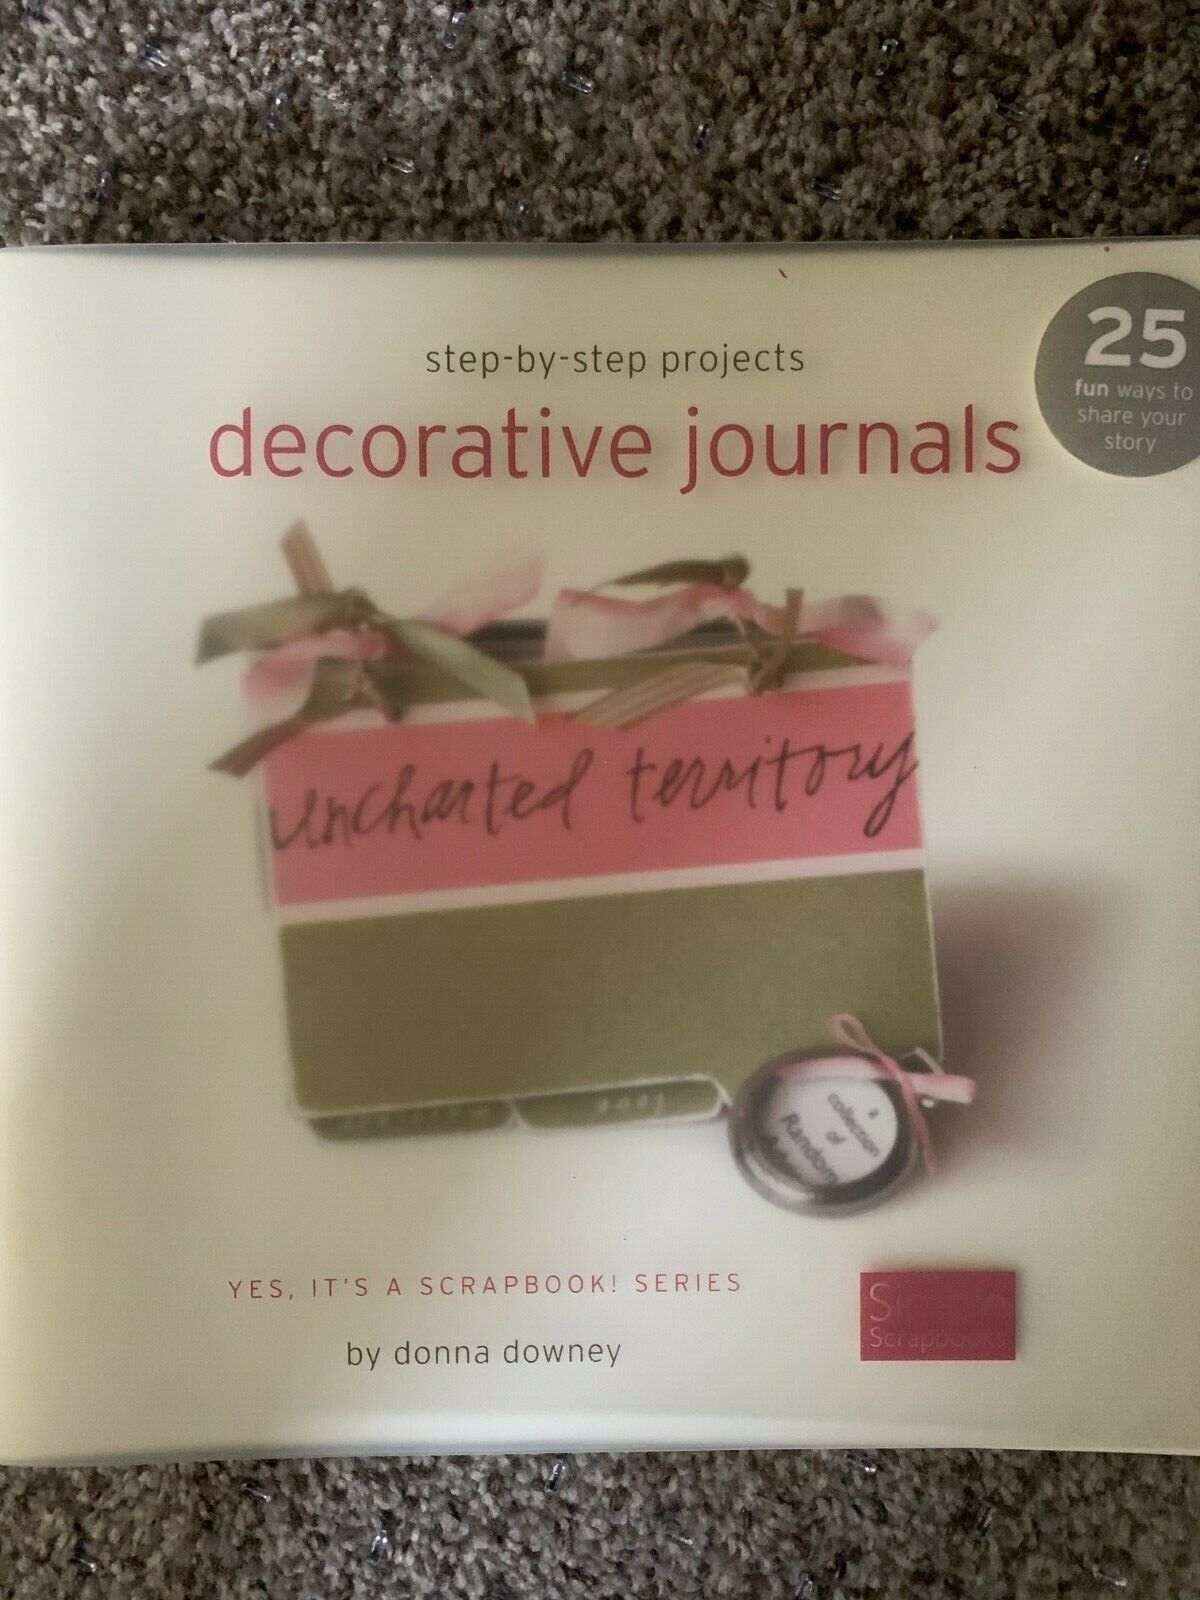 Scrapbooking  Book "step-by-step Projects For Decorative Journals